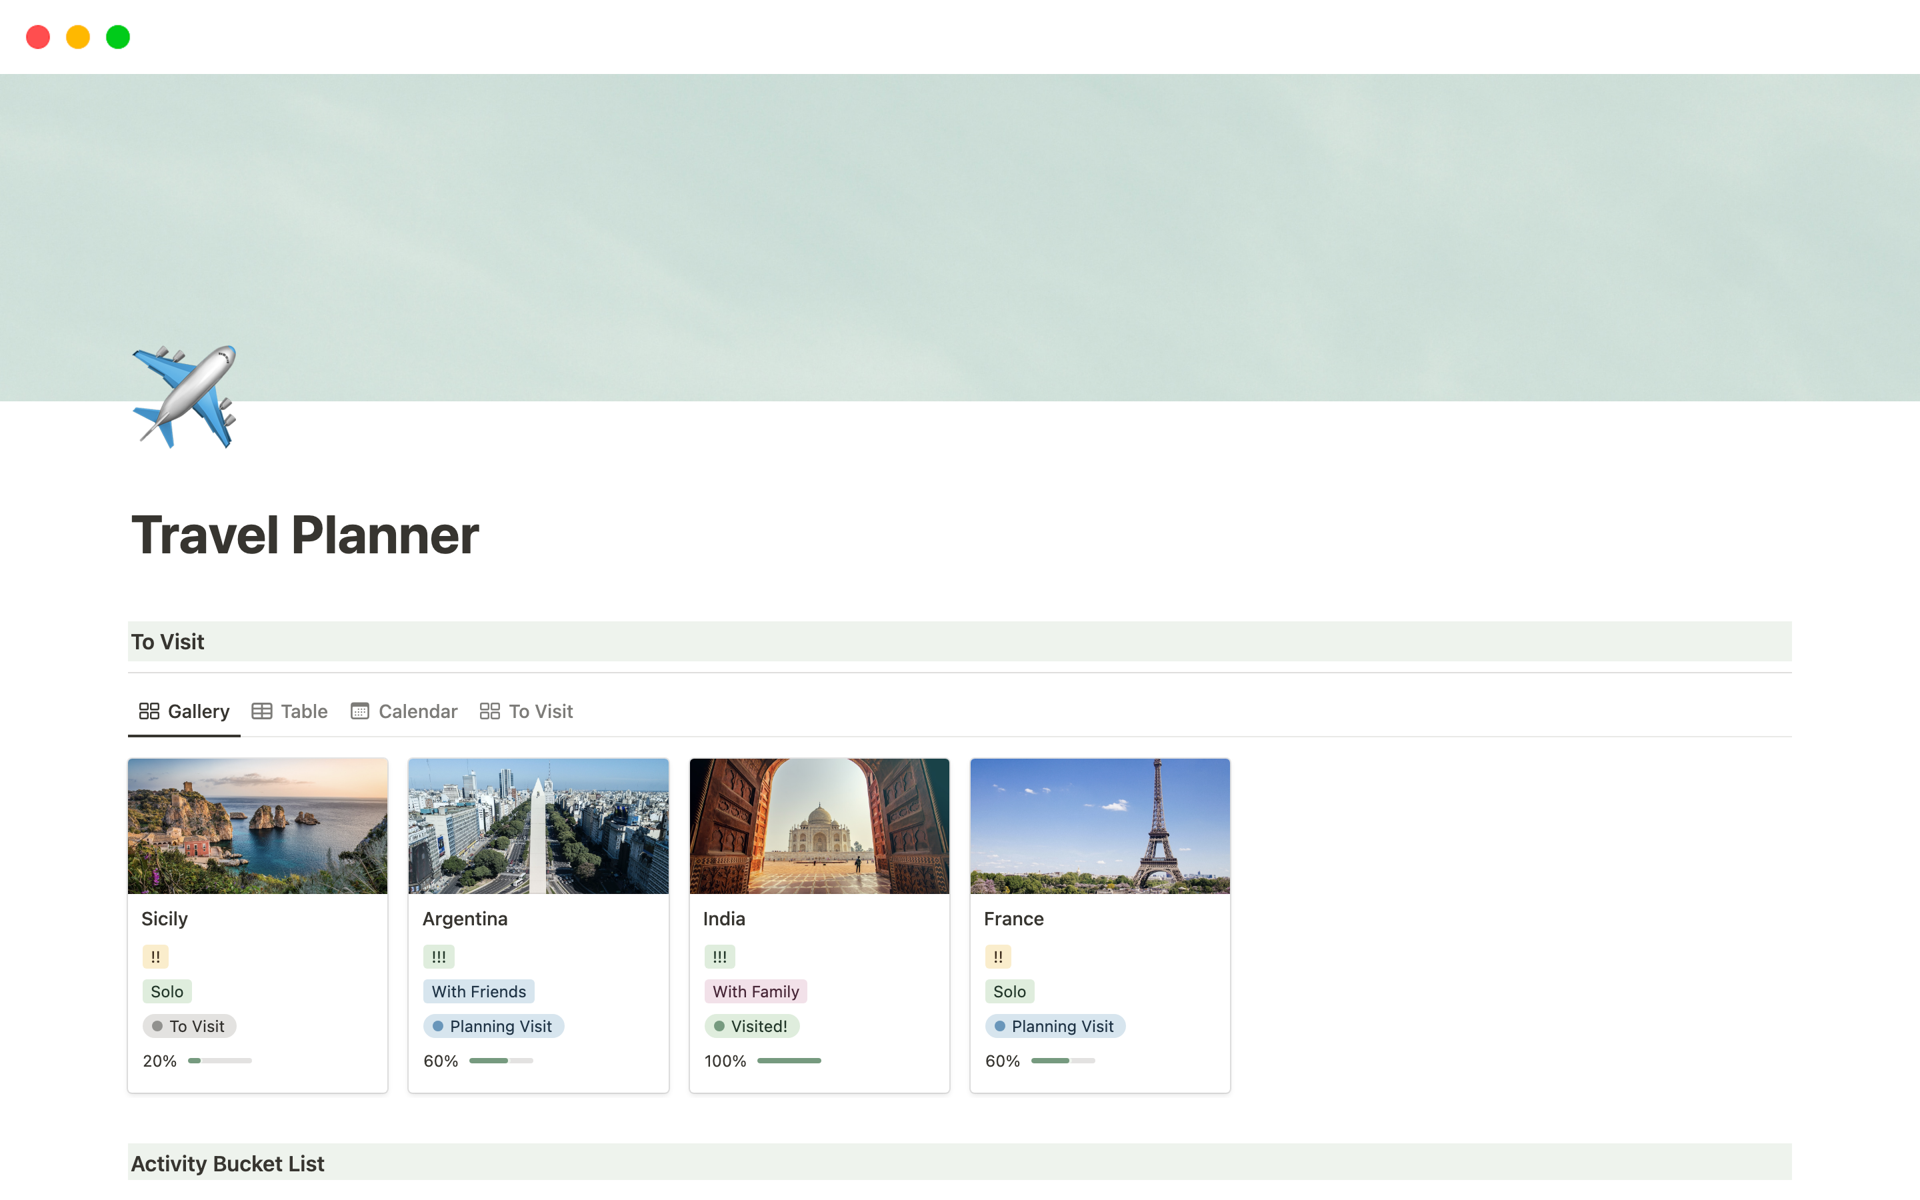 This is a fully functional, ready to use Notion travel planner to help you plan visits and create travel checklists! 